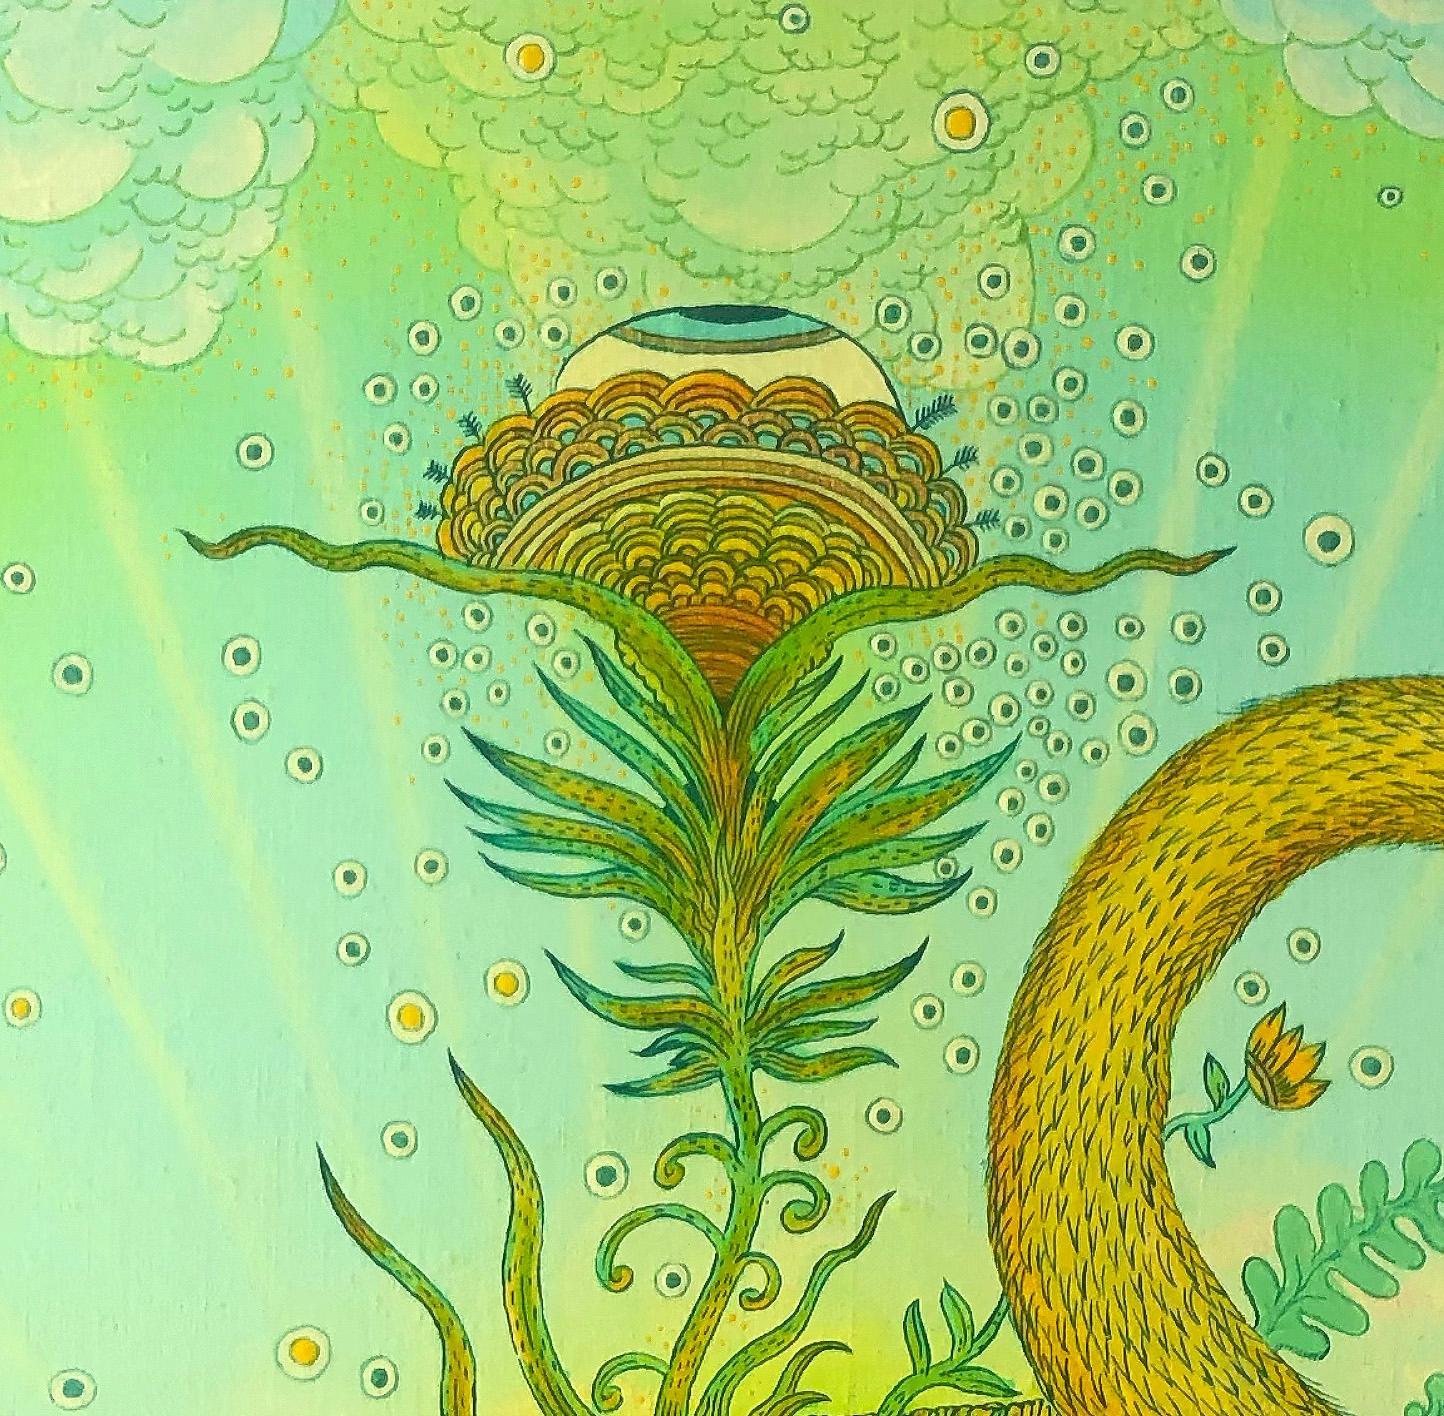 A golden swan with blue green hues in its plumage stands at the center of this fantastical landscape in acrylic on linen mounted on aluminum panel by Peter Hamlin. The meticulously detailed creature is whimsical and surreal, standing atop the center